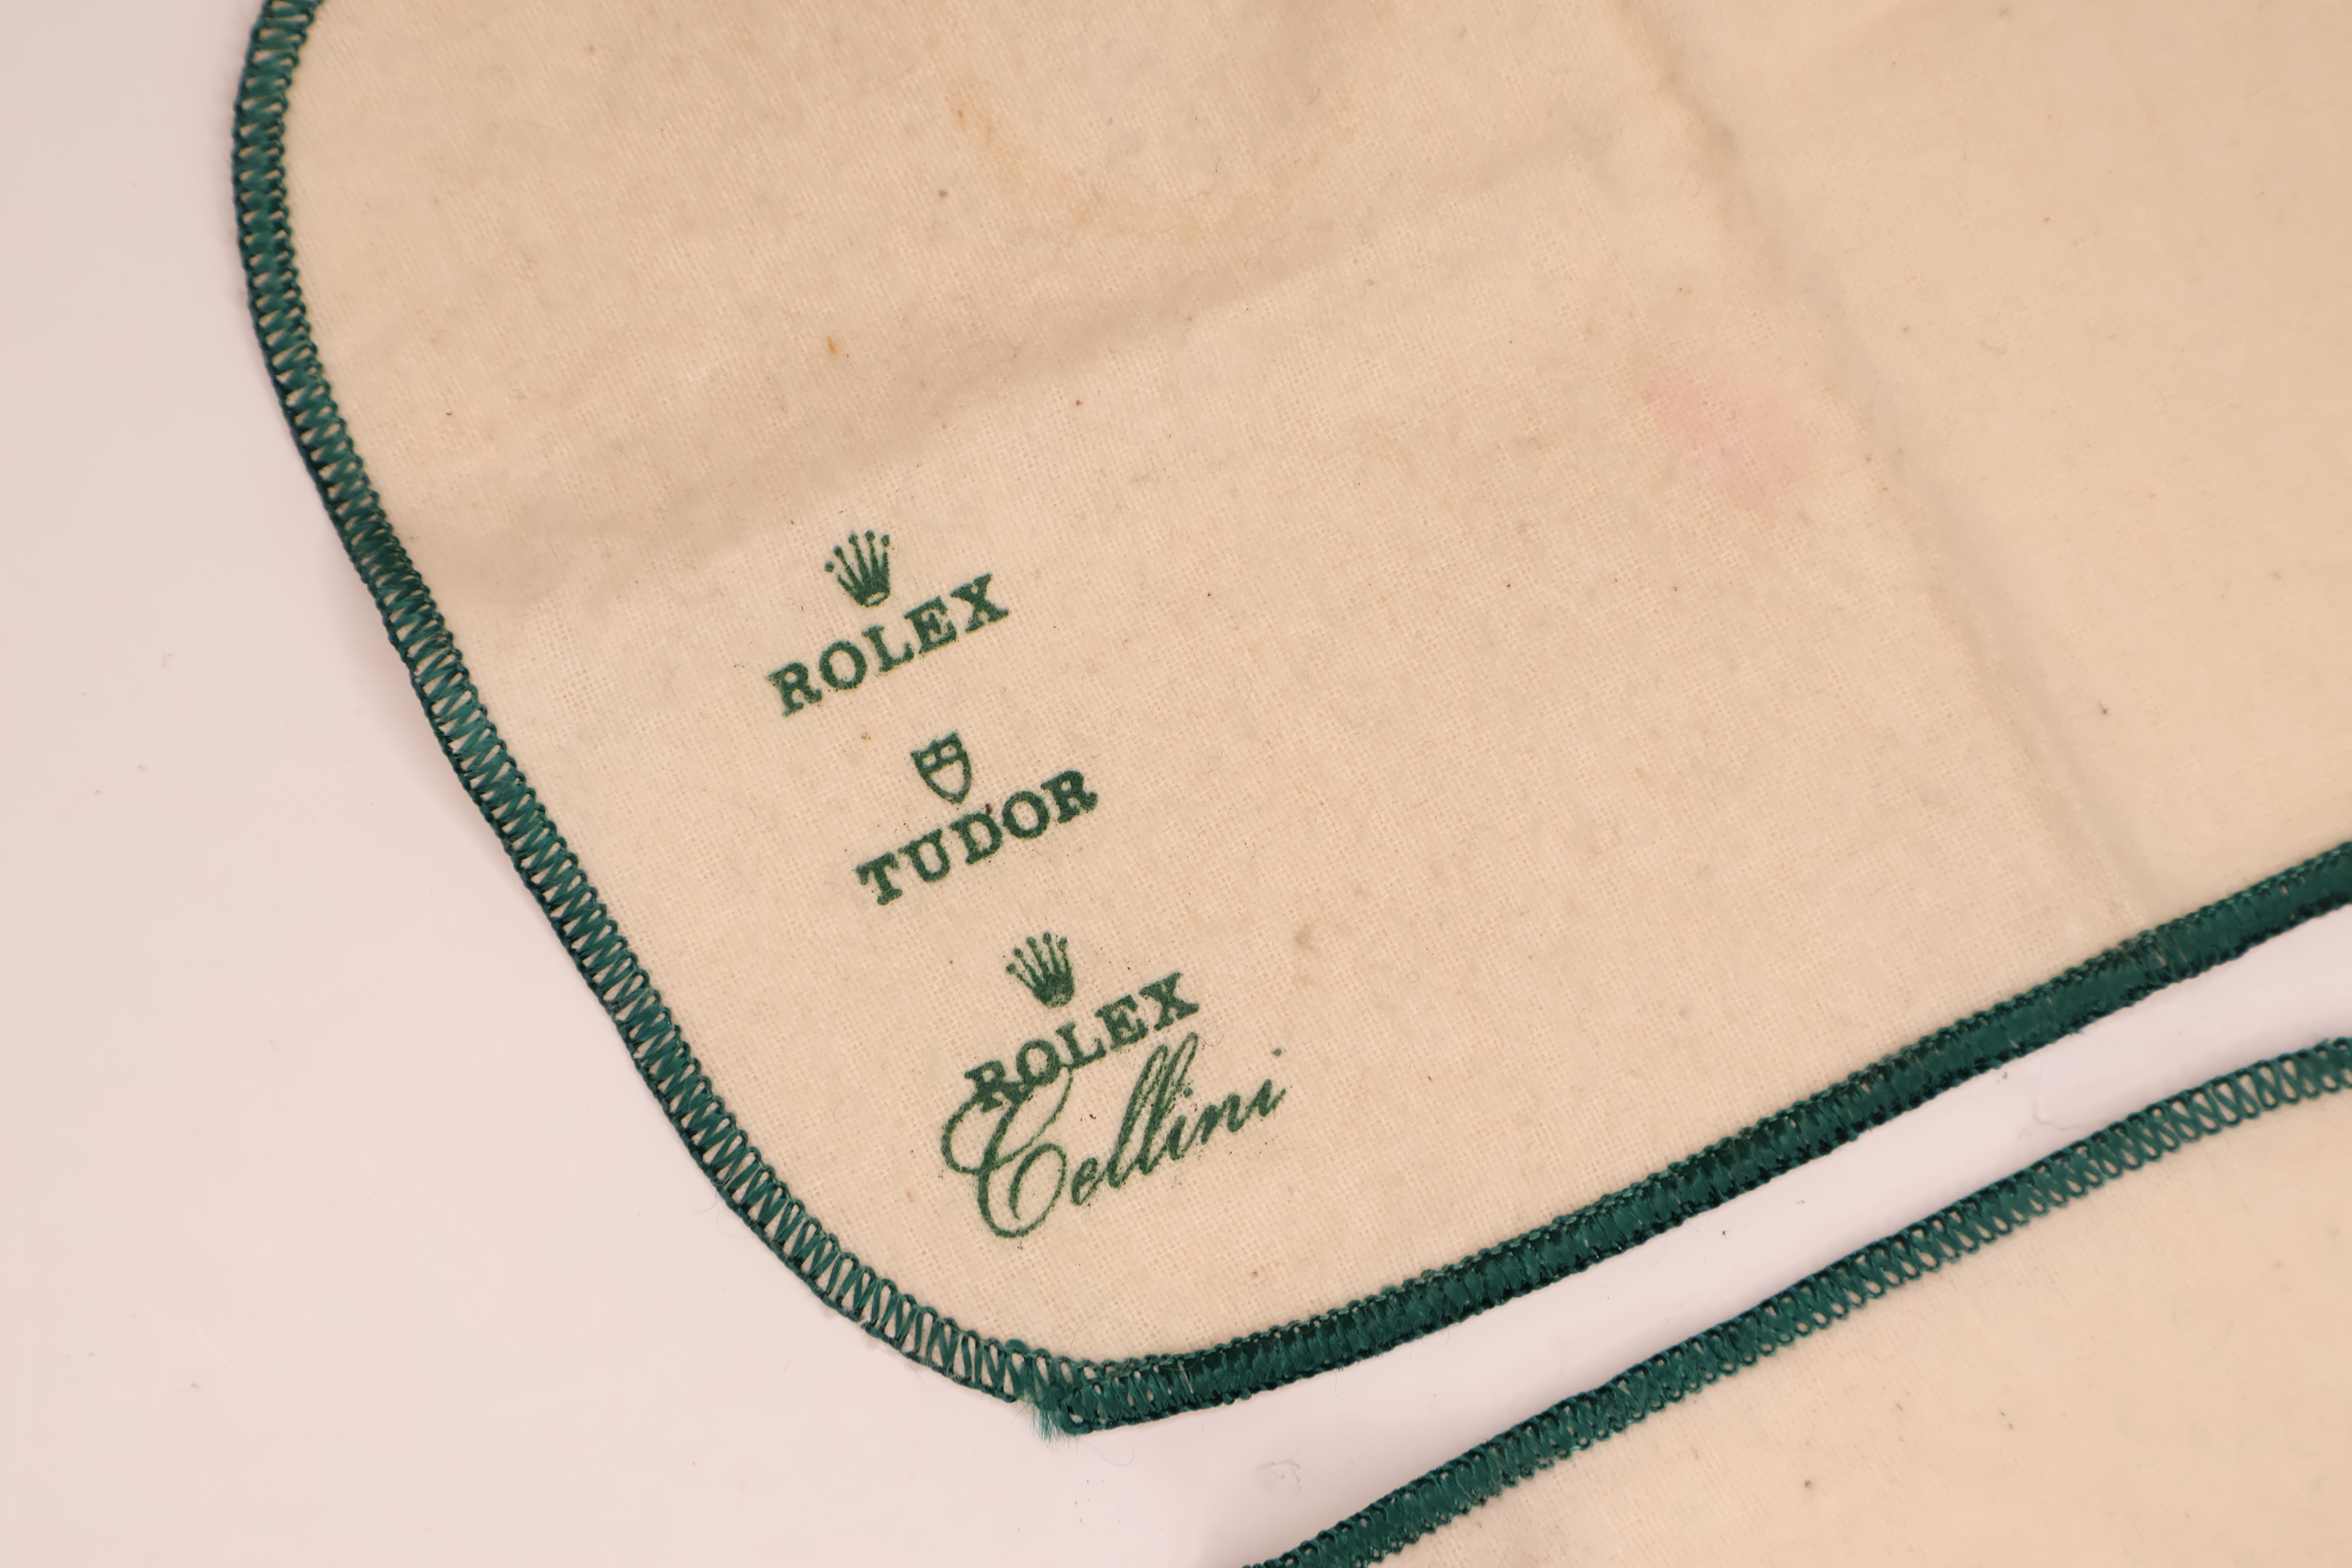 *To Be Sold Without Reserve* Rolex and Tudor cleaning cloths (2) - Image 3 of 3